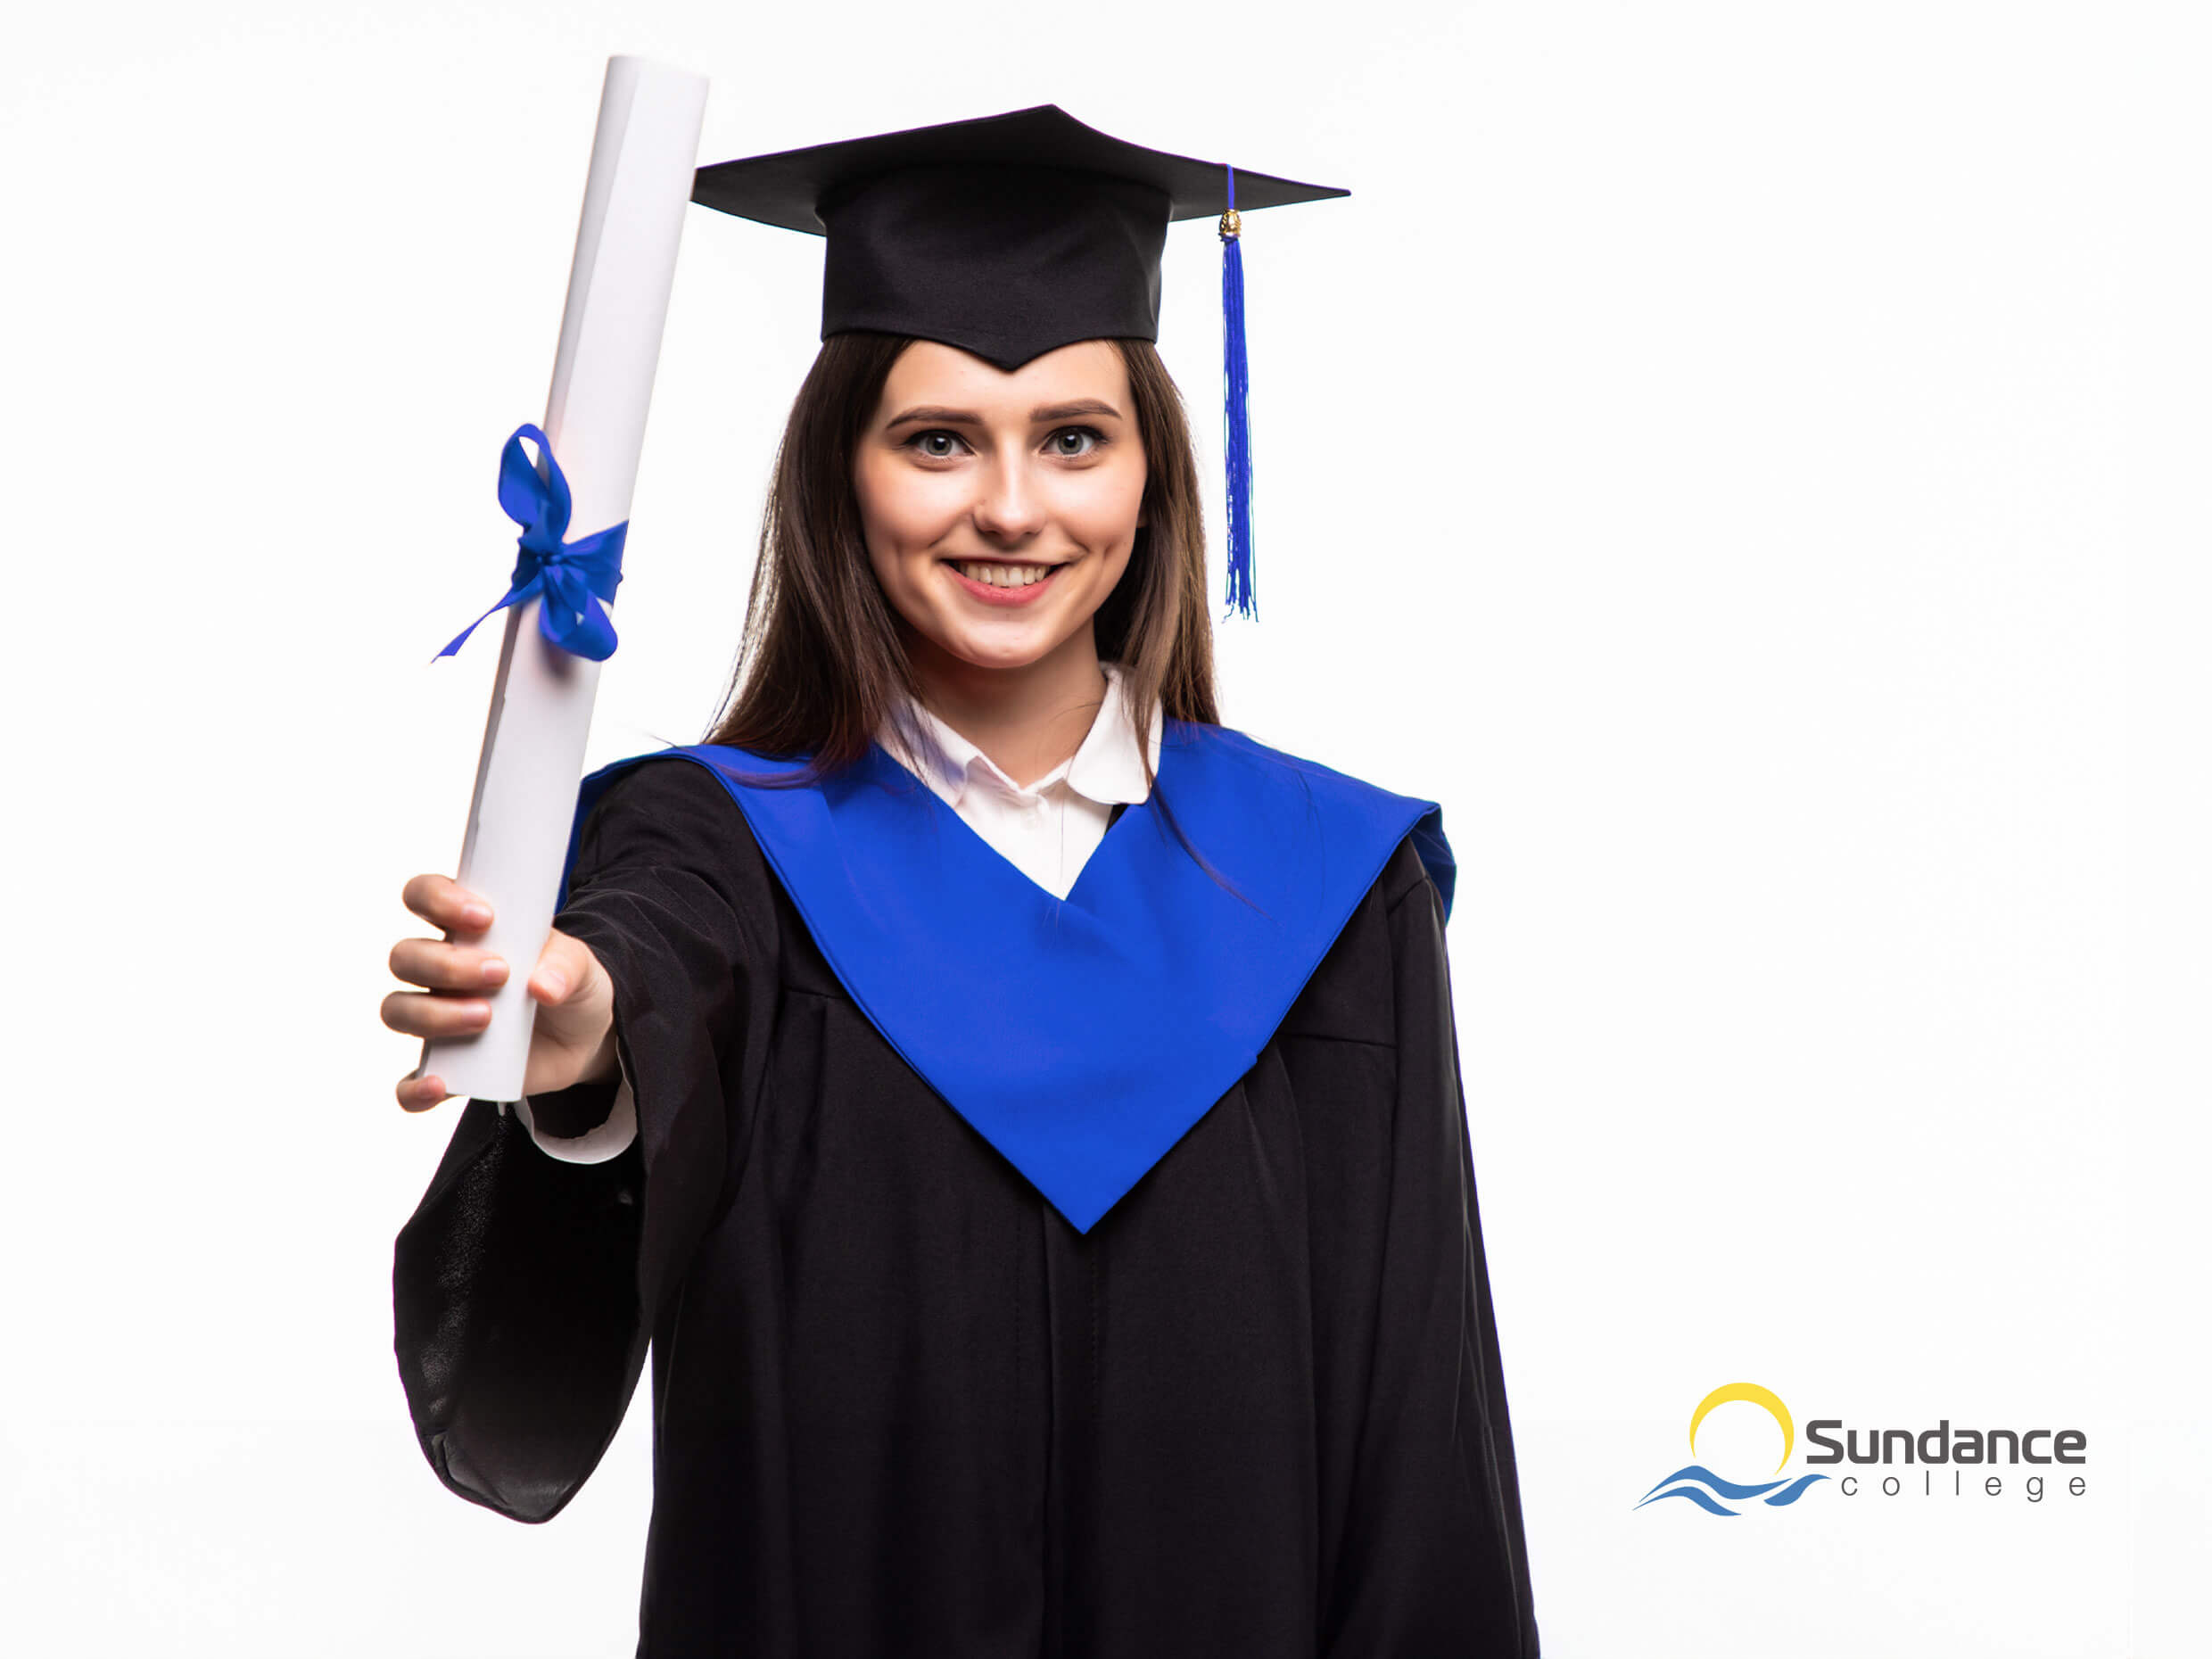 accounting, tax, and payroll diploma graduate in cap and gown holding diploma smiling at camera, showing diploma as most important step in becoming bookkeeper